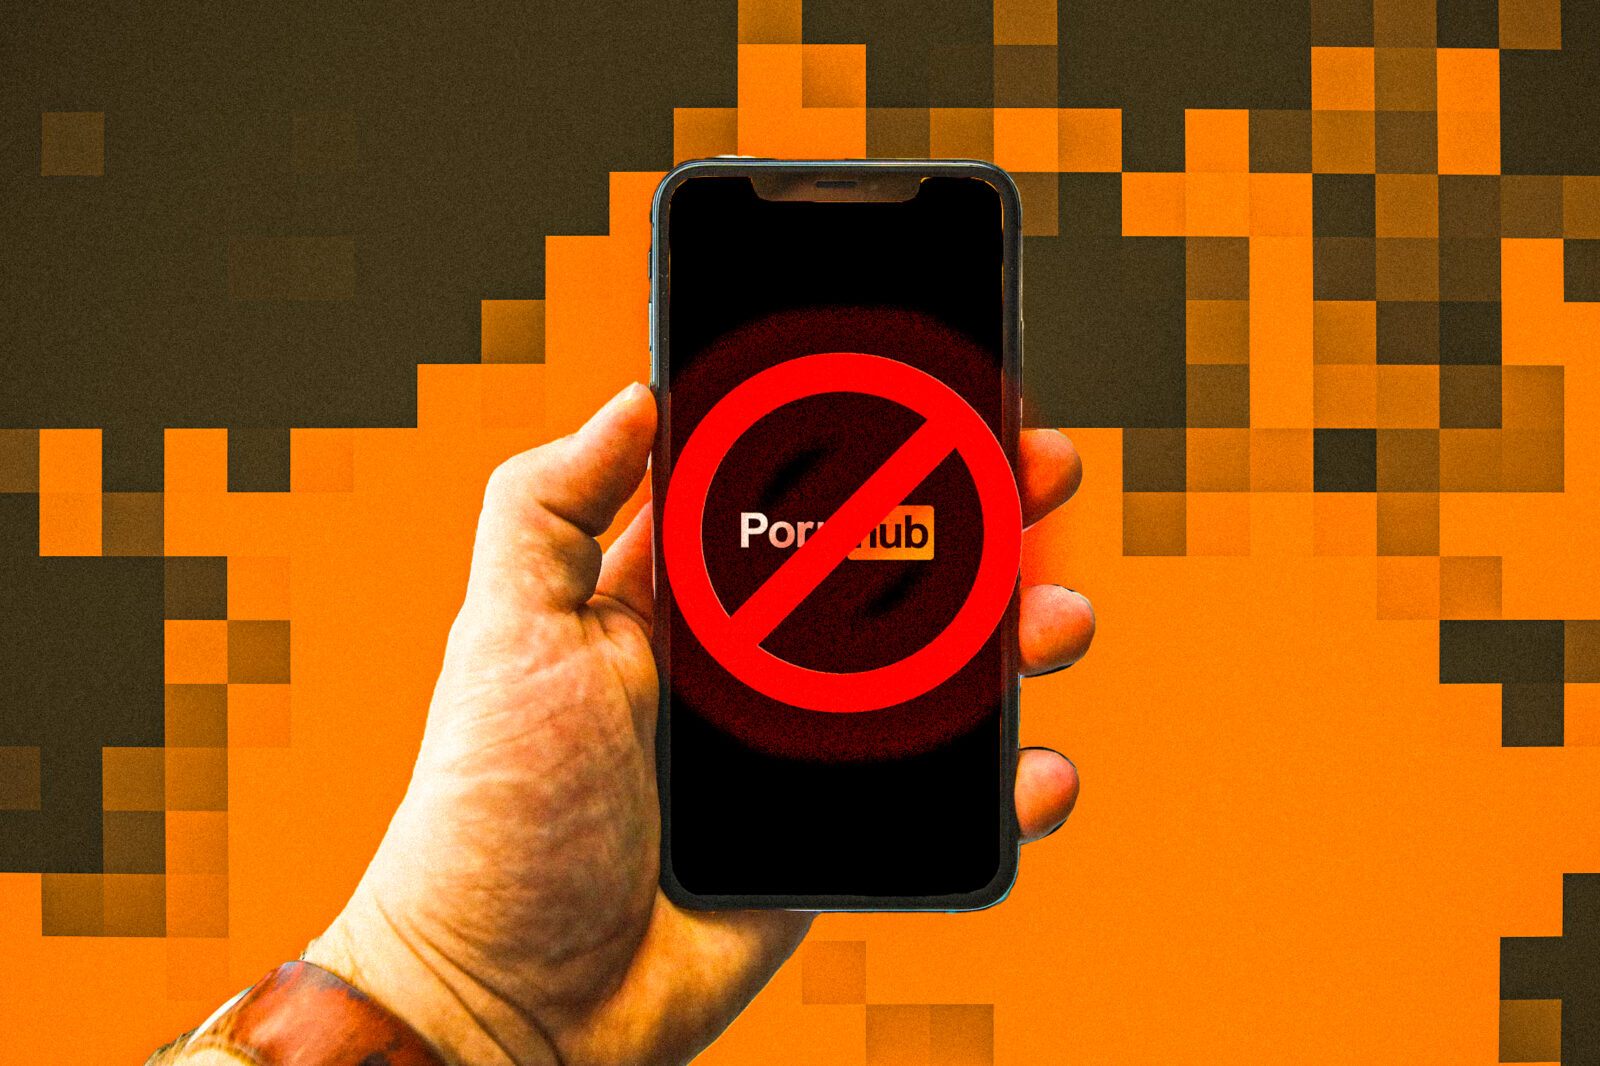 Instagram Is the Latest Company to Cut Ties With Pornhub - RELEVANT